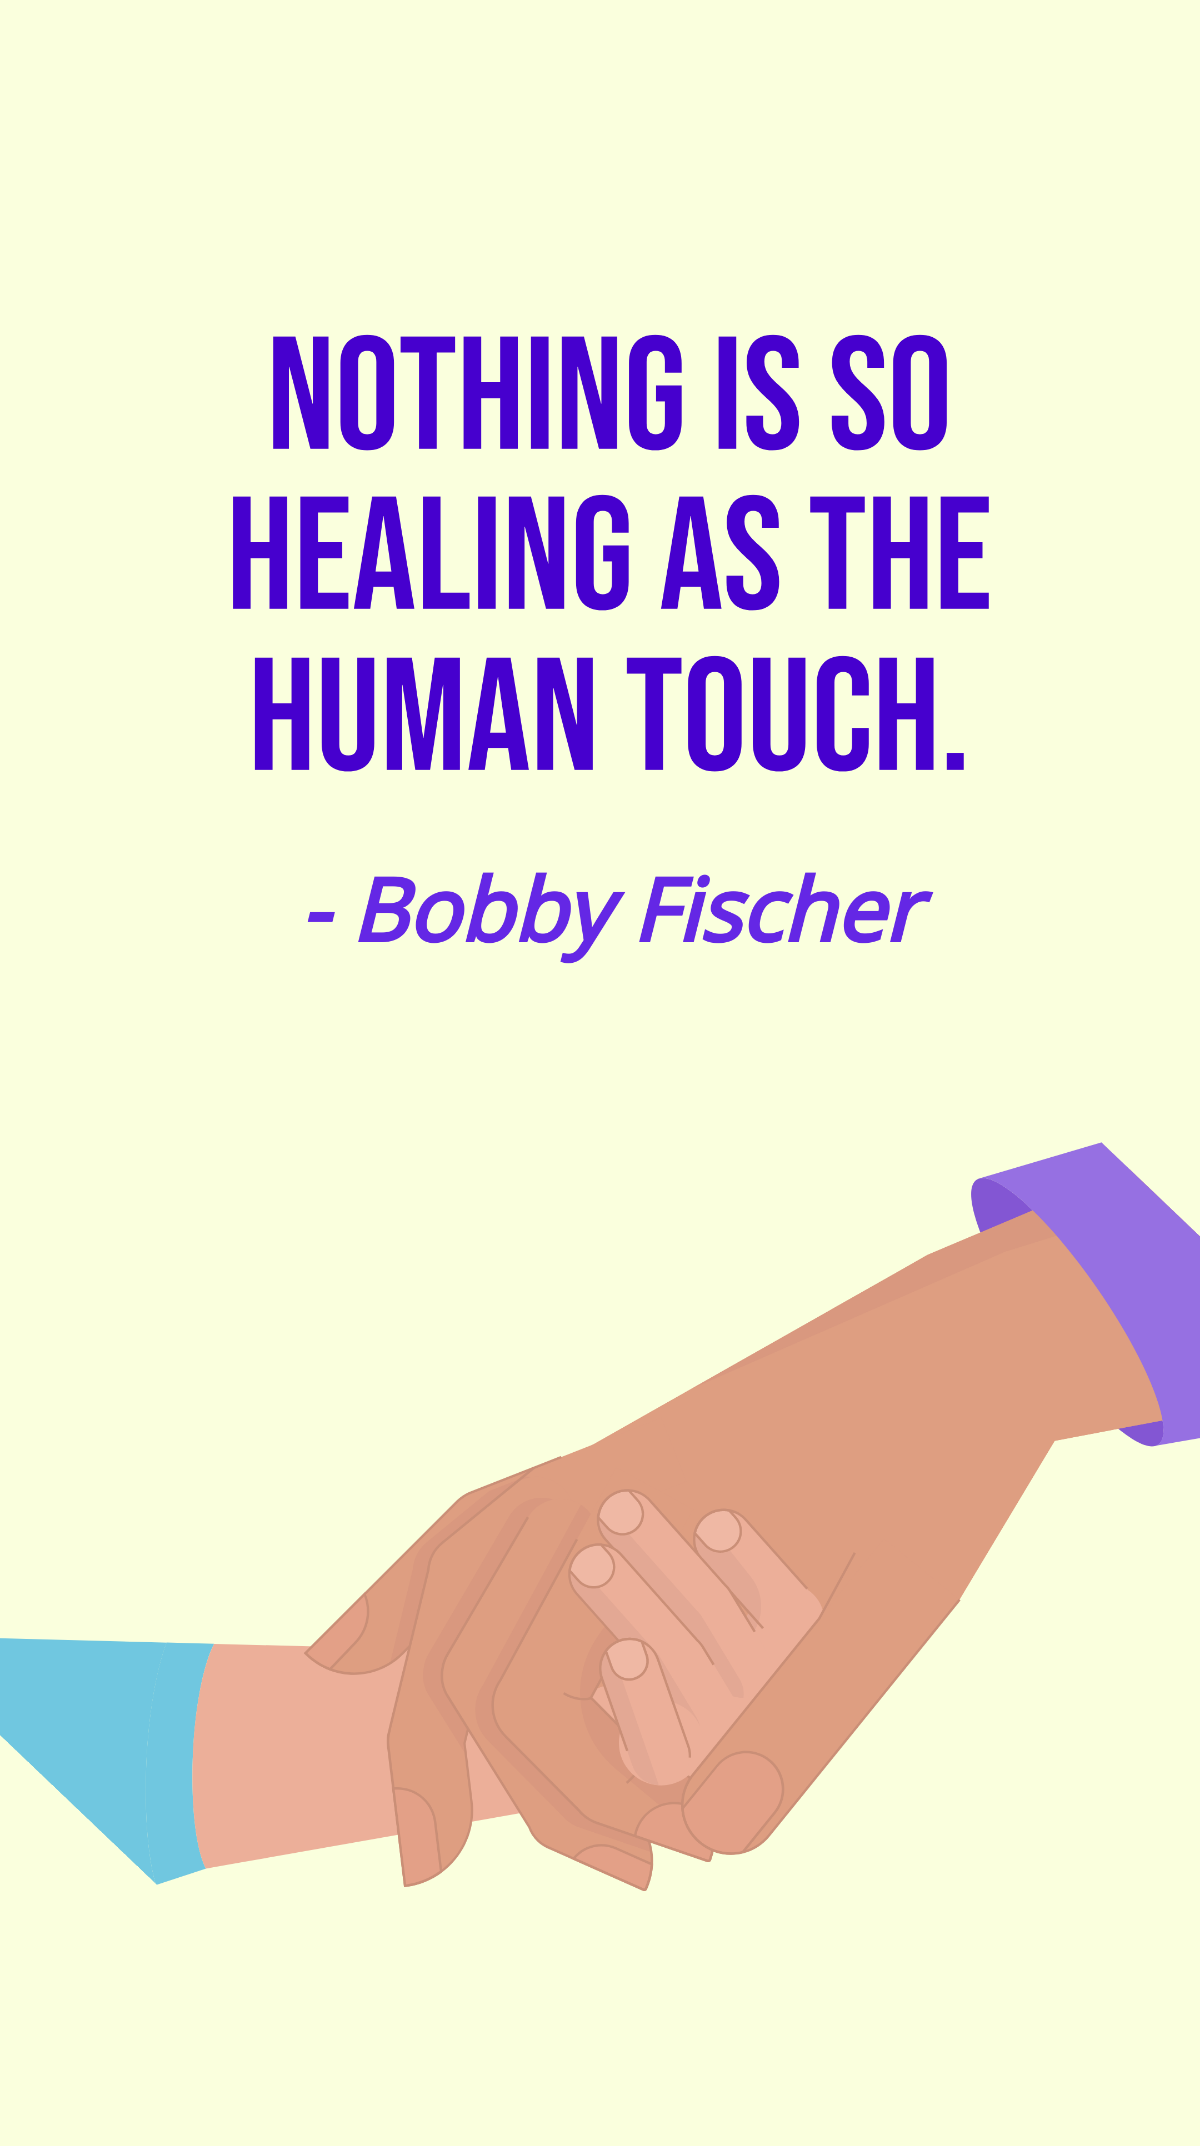 Bobby Fischer - Nothing is so healing as the human touch. Template ...